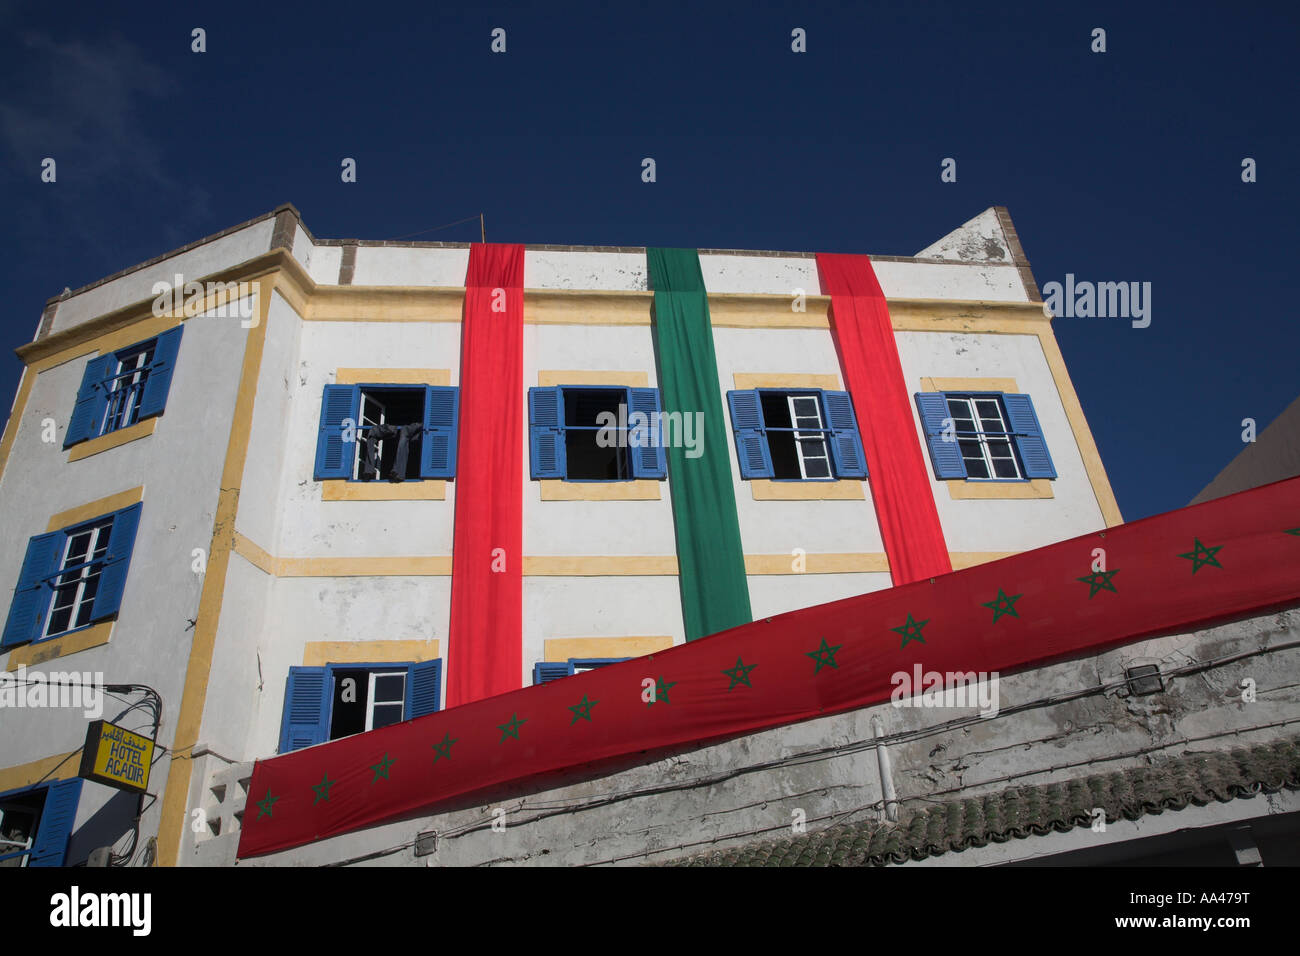 Building decorated in national colours red green sashes Essaouira, Morocco, north Africa Stock Photo